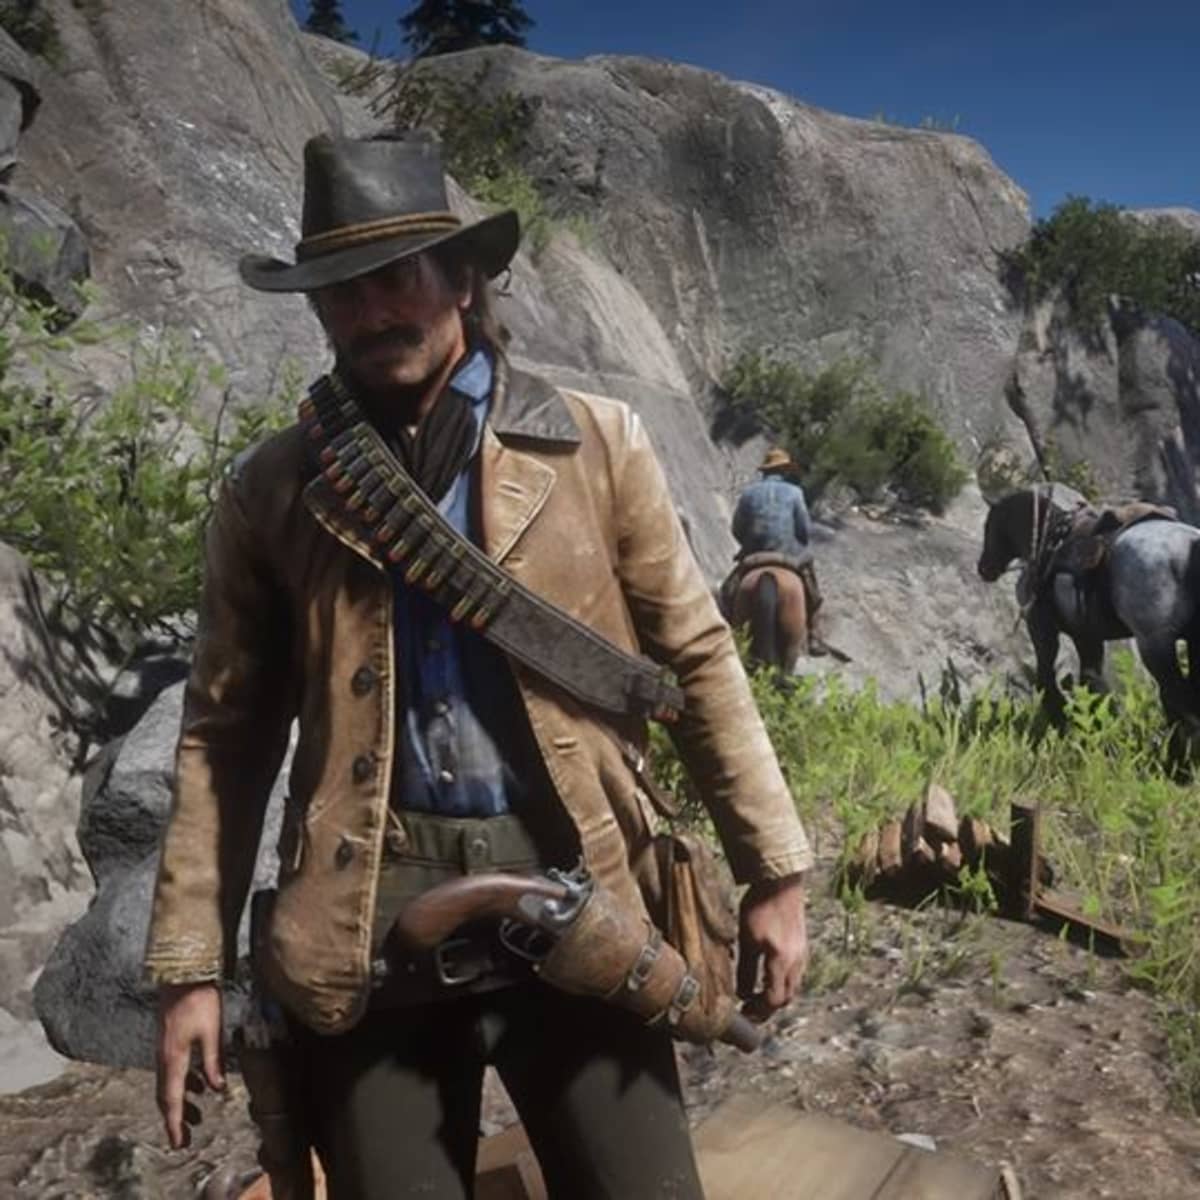 How to Trains in "Red Dead Redemption 2": Easy Money With Heists - LevelSkip